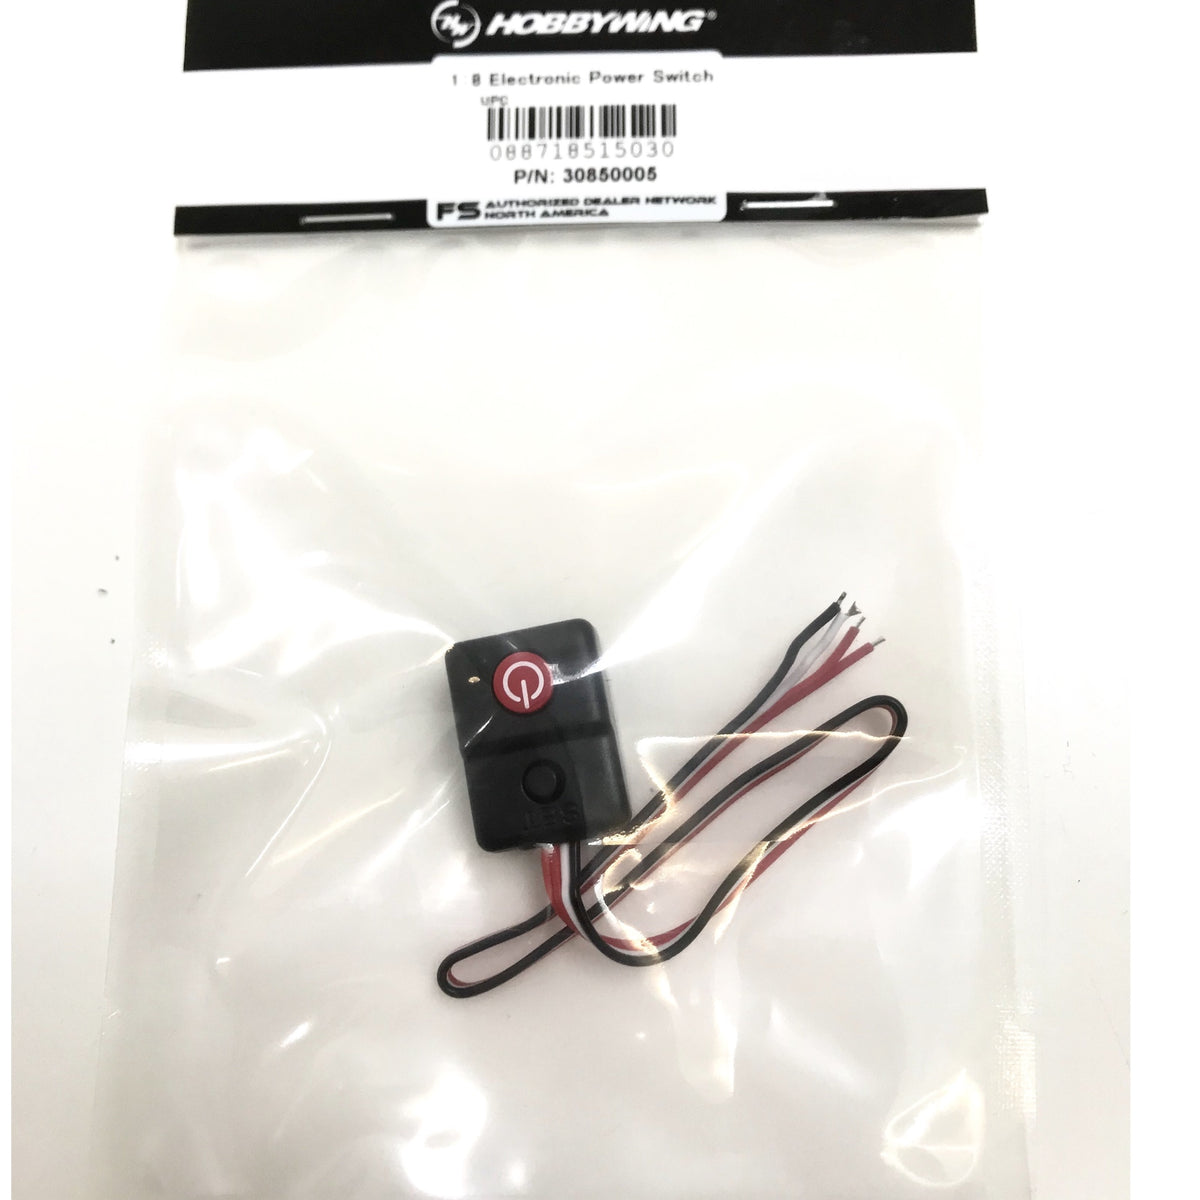 Electronic Power Switch - 1/8th Car, large scale ESC